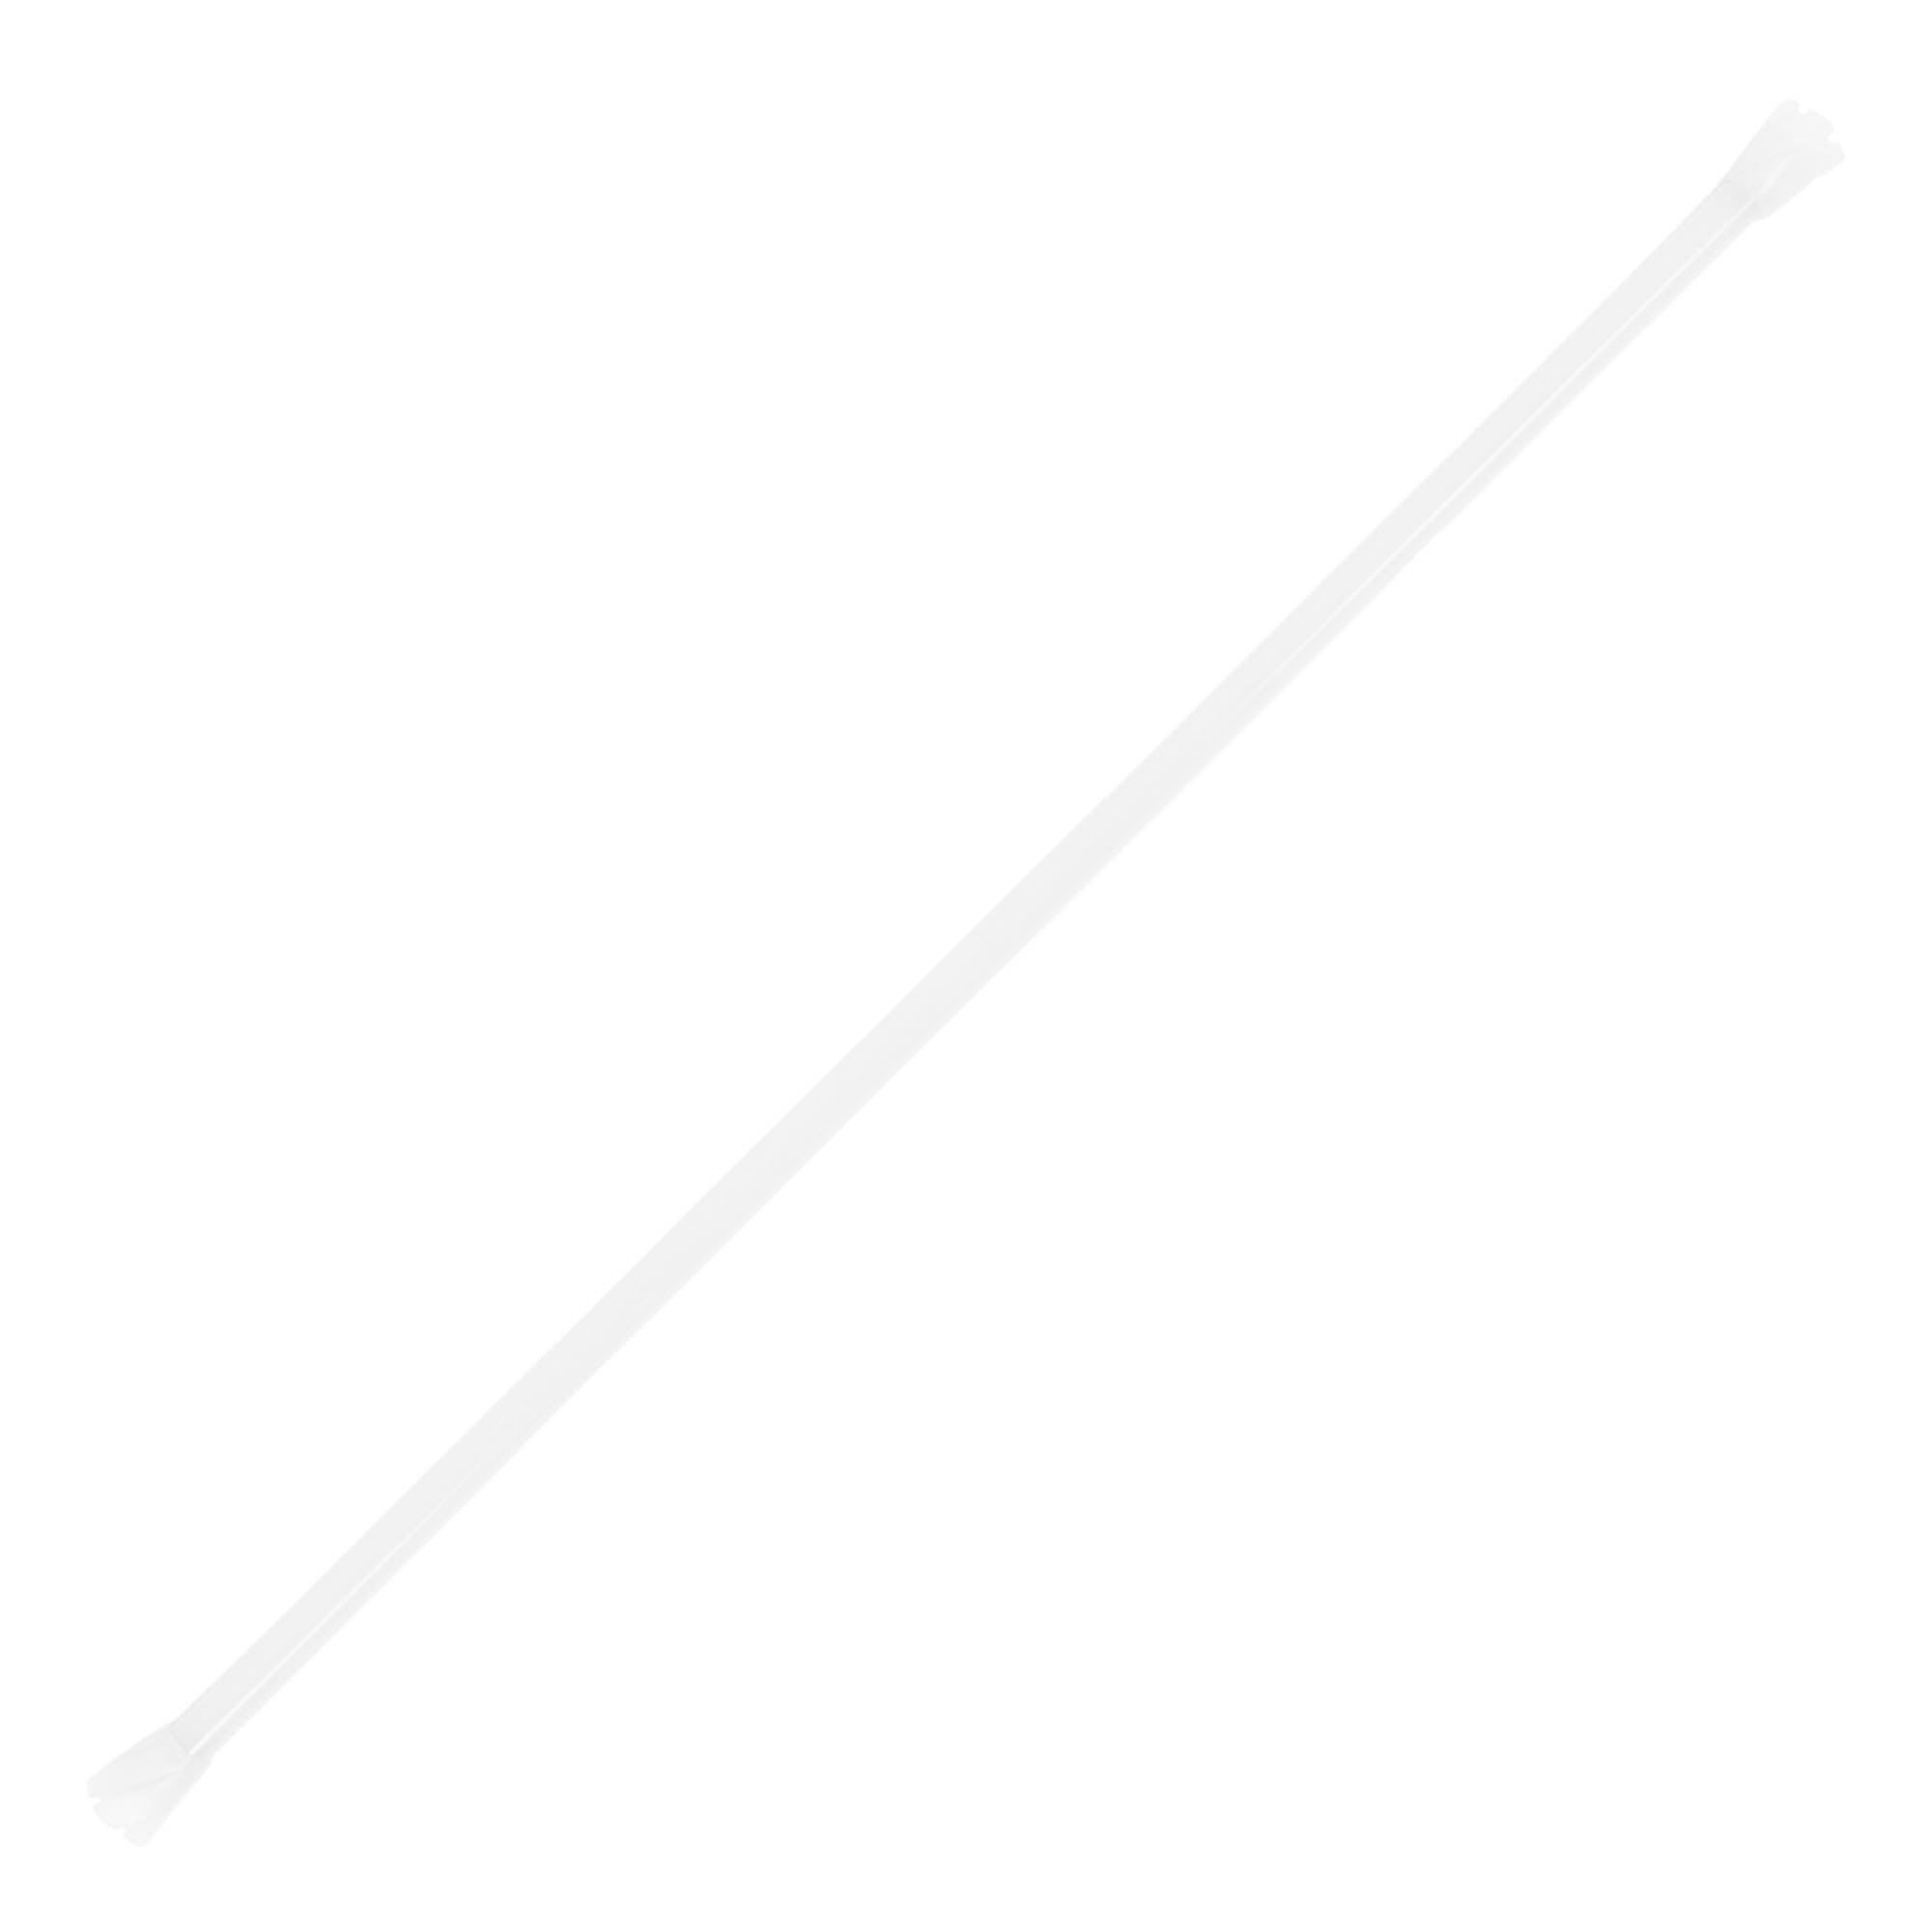 Echo spin staff 120cm on a white background